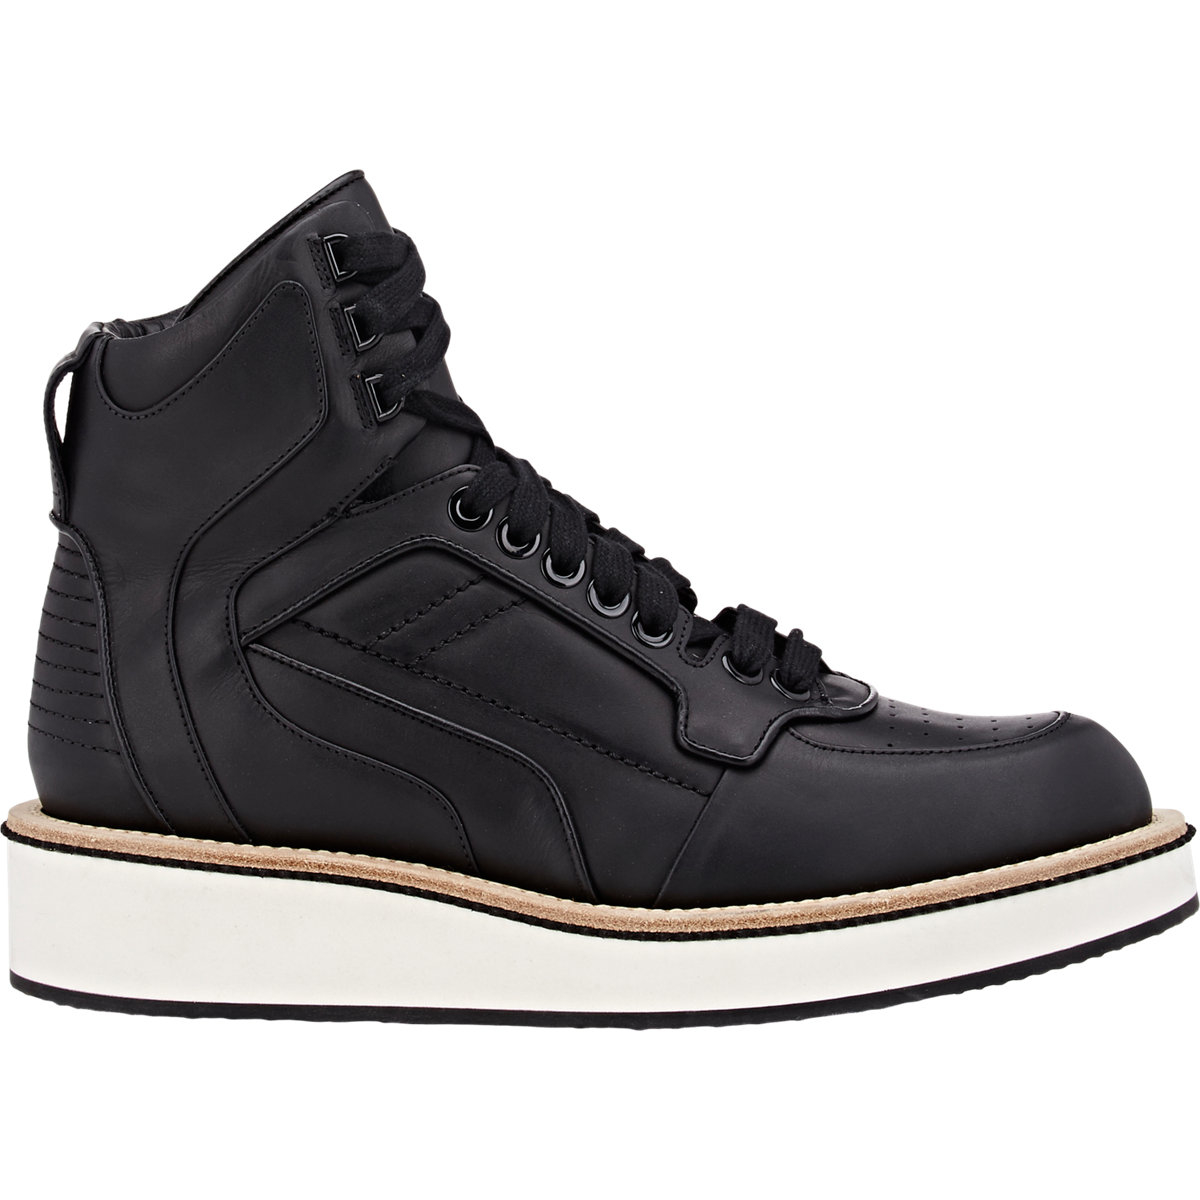 Lyst - Givenchy Men's Sneaker Boots in Black for Men